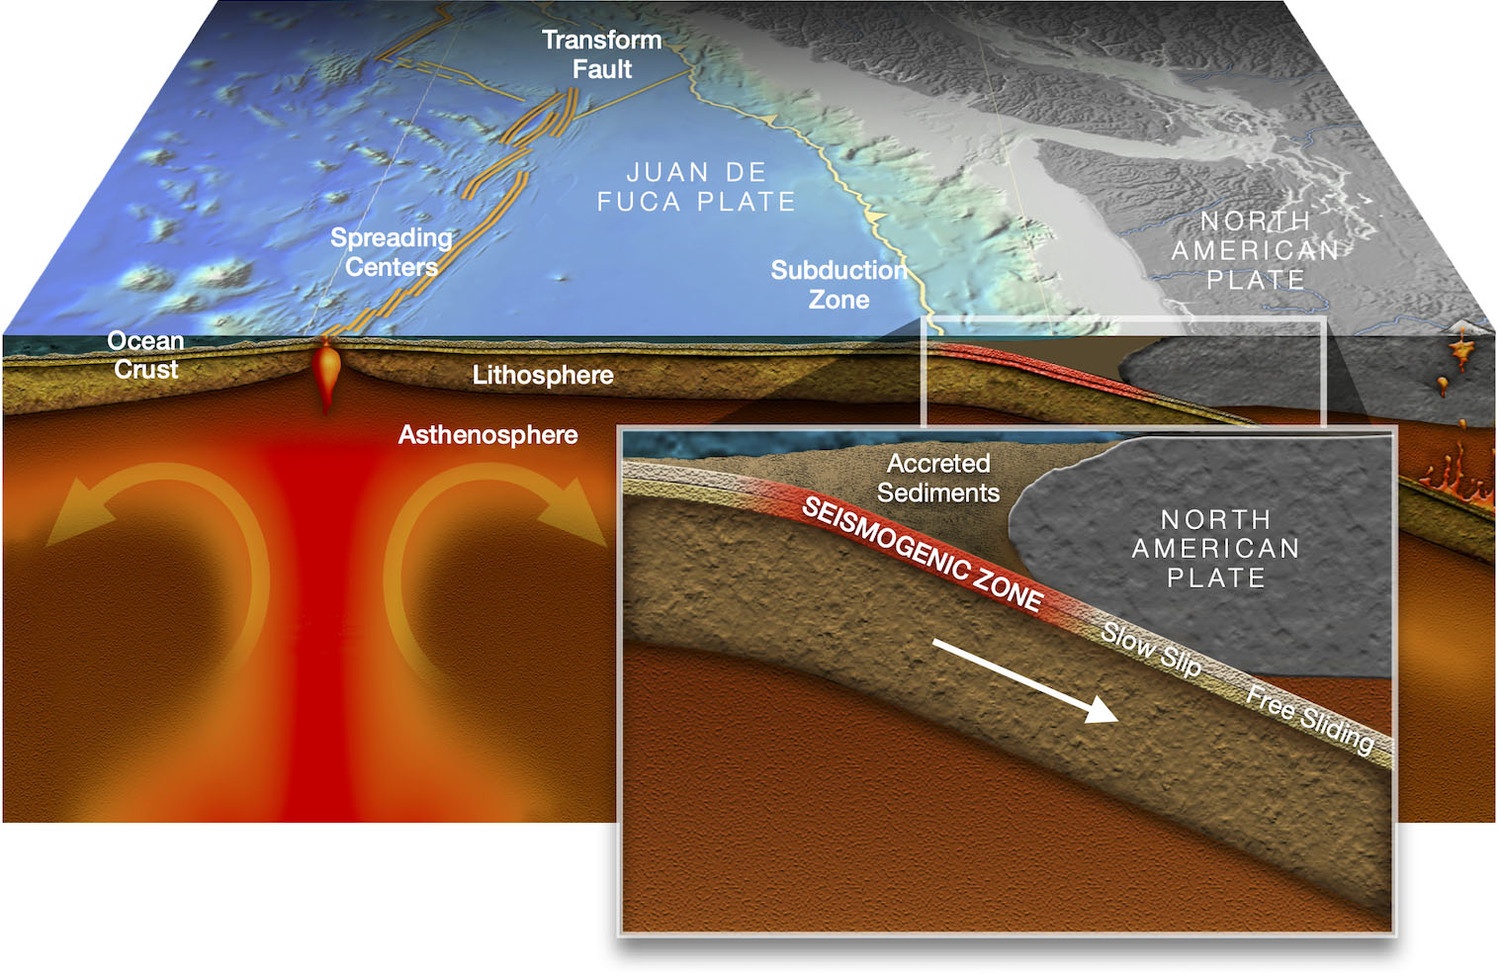 Subduction Zone with Blow Out